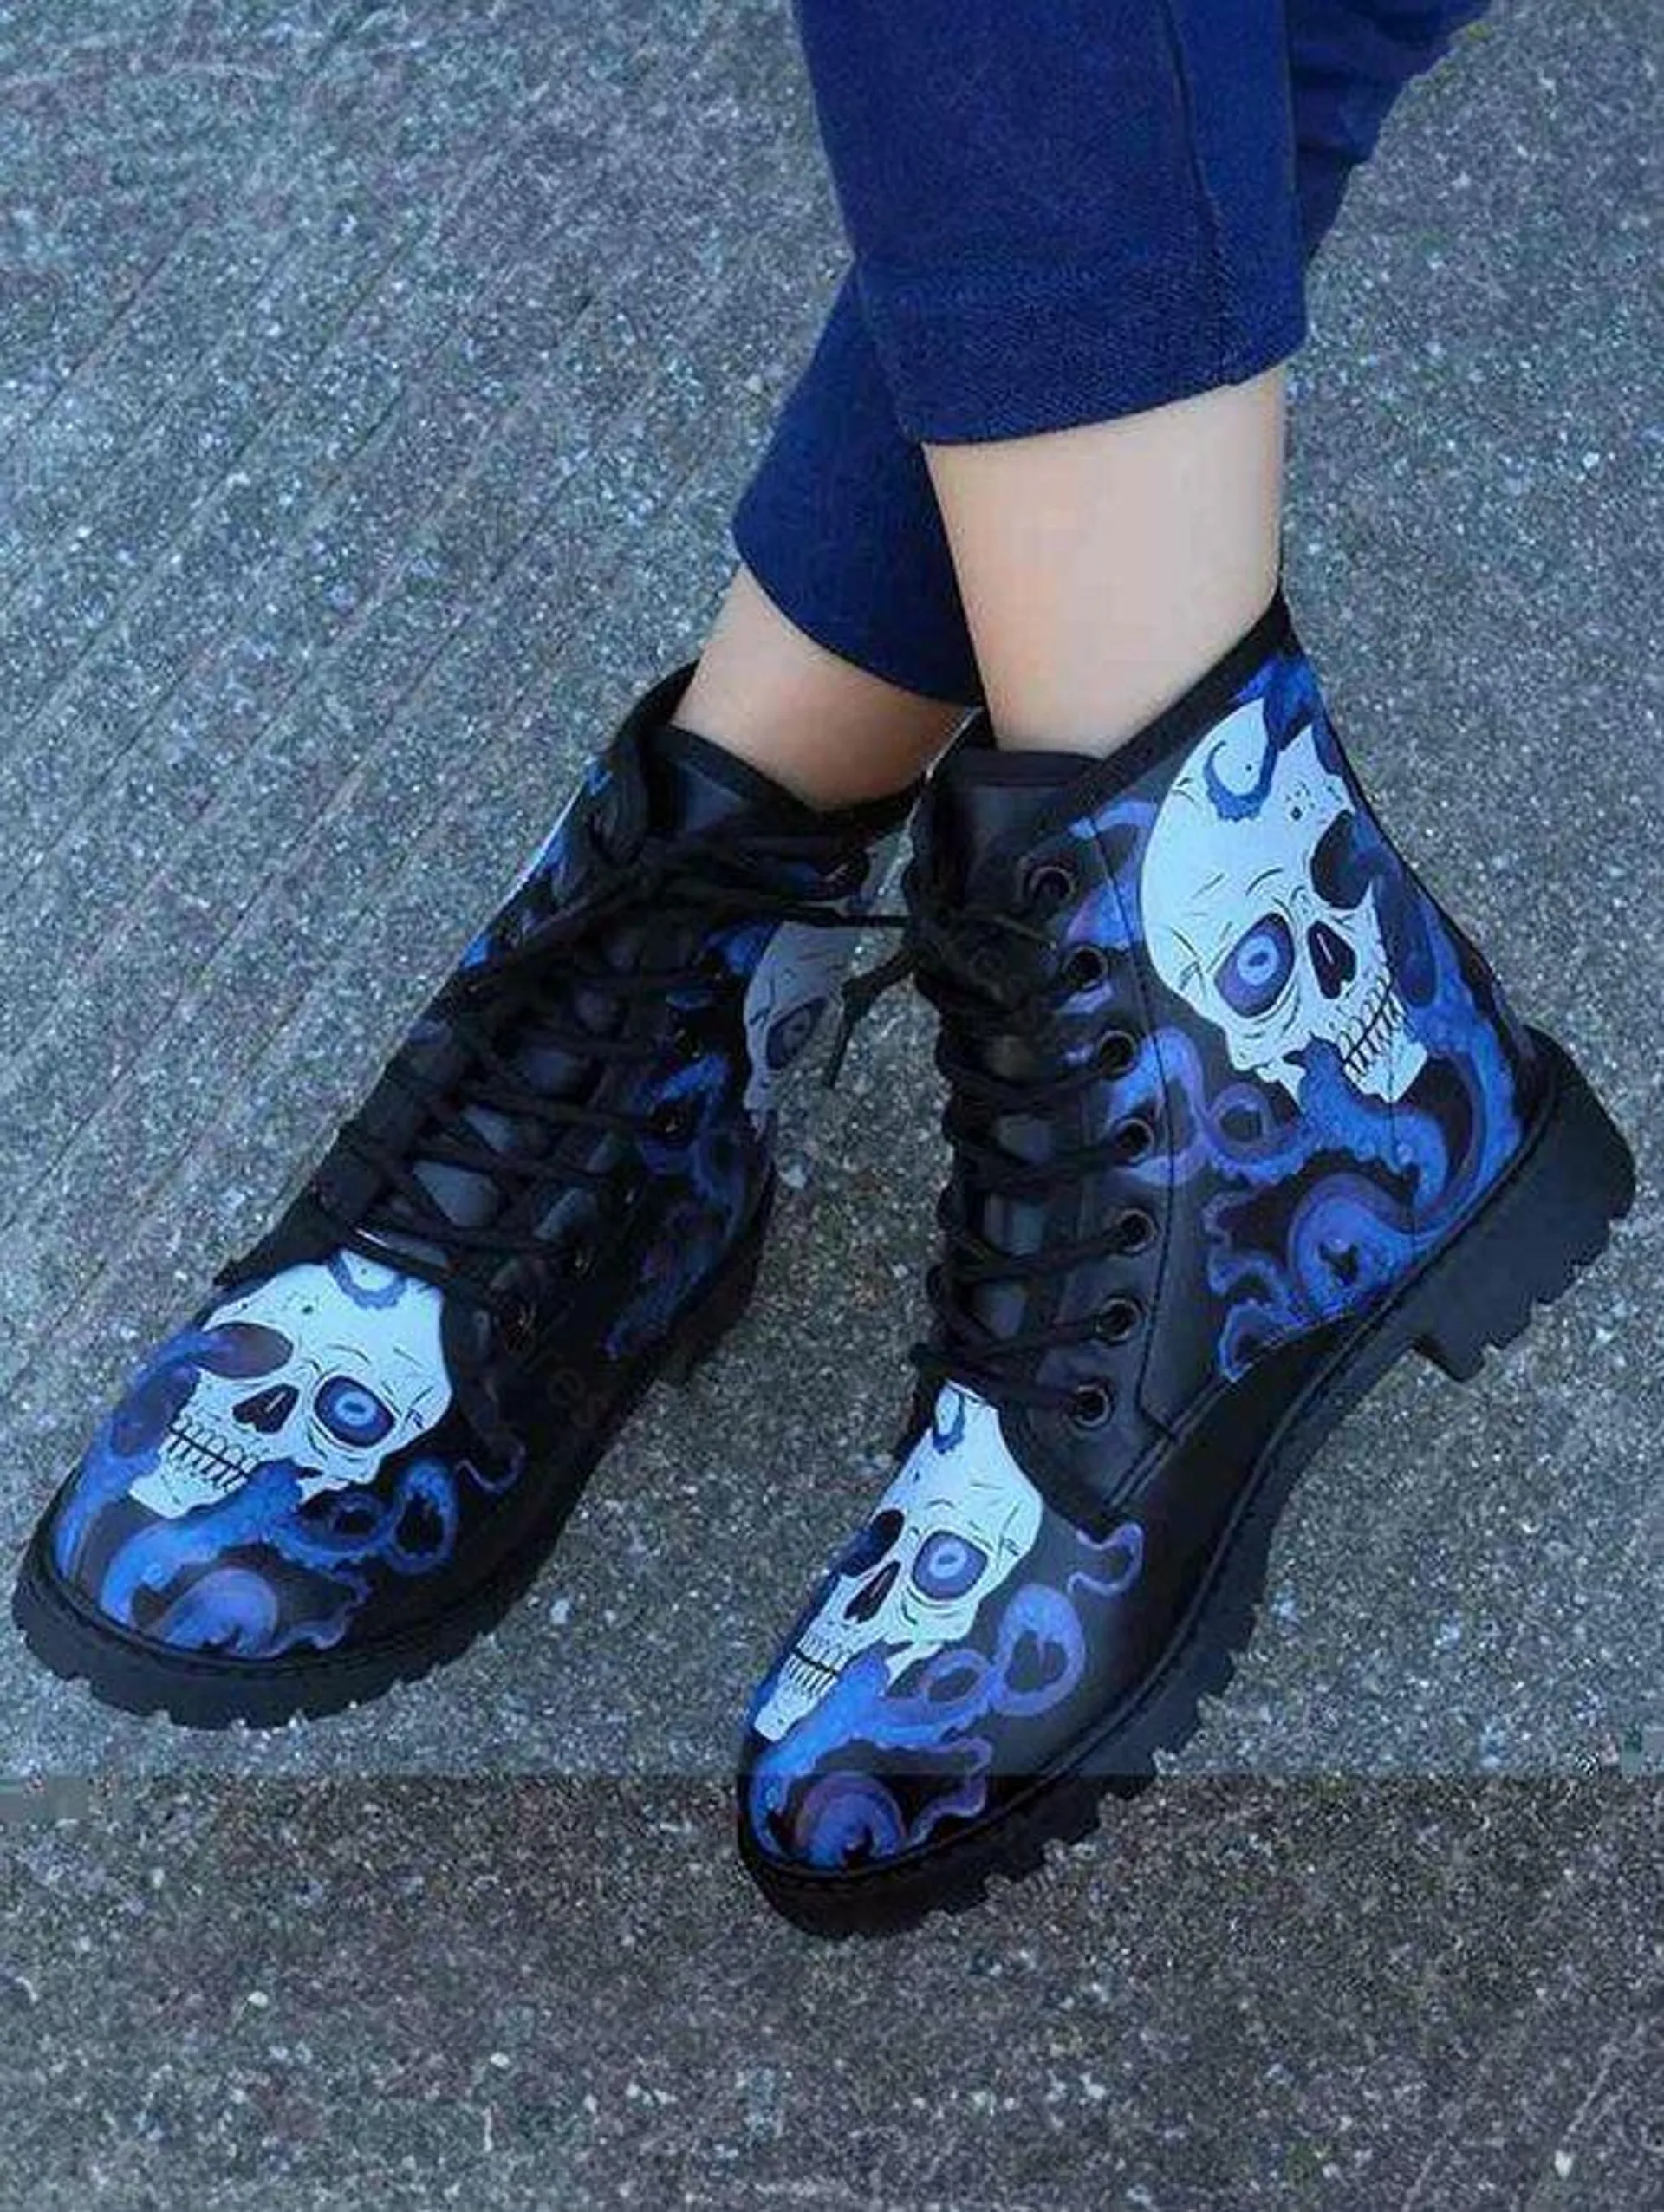 Skull Print Round Toe Lace Up Halloween Boots